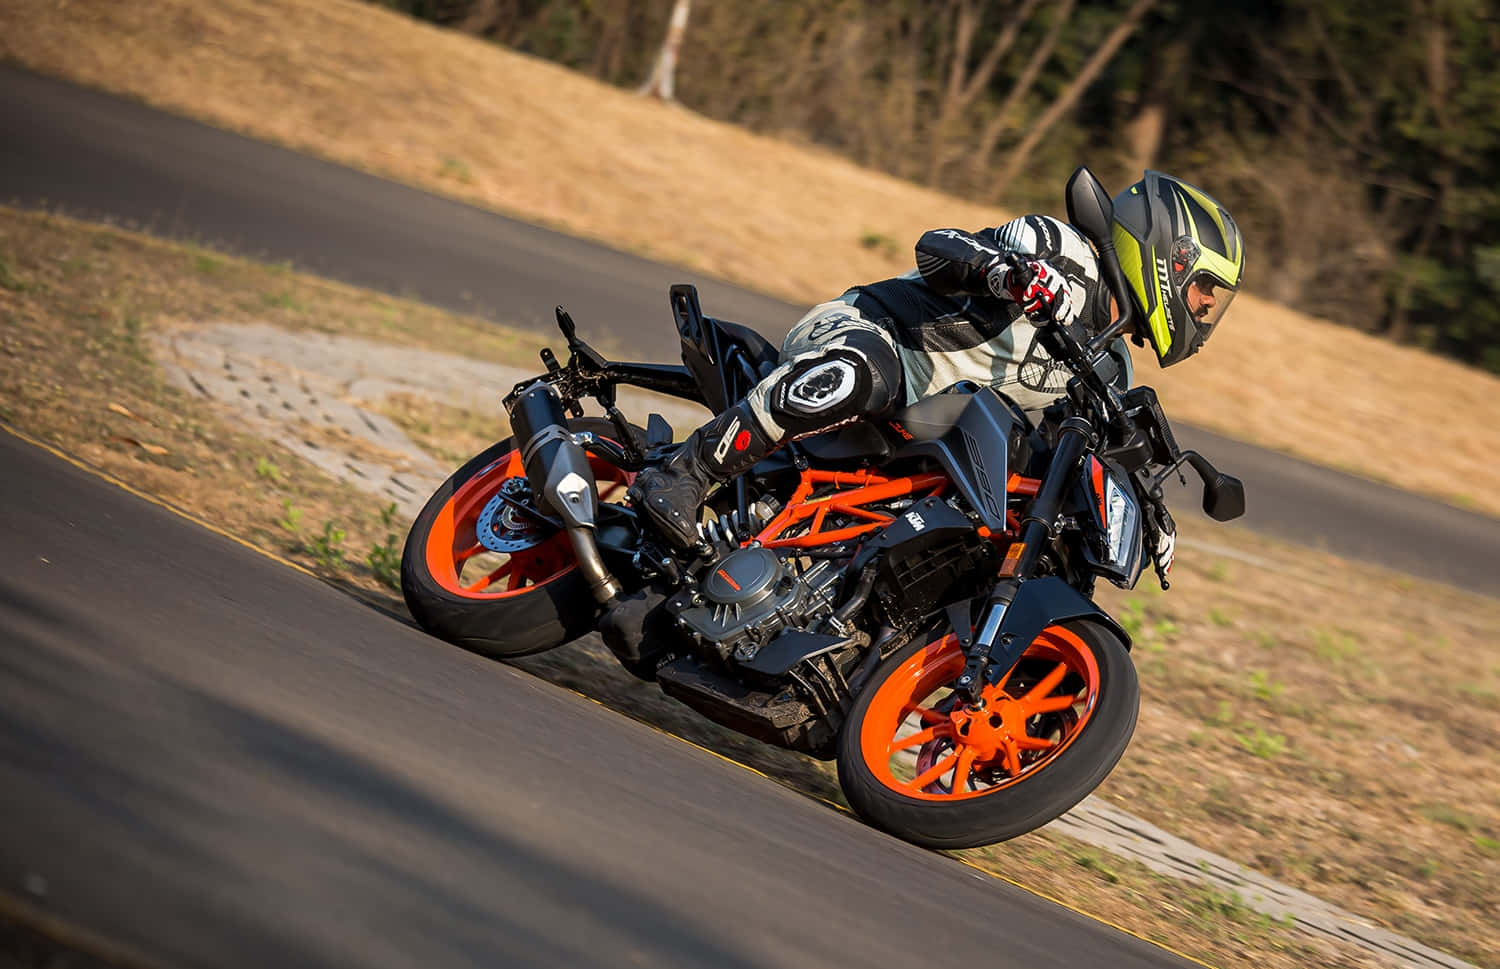 KTM Duke Ready To Take On Any Road Challenges